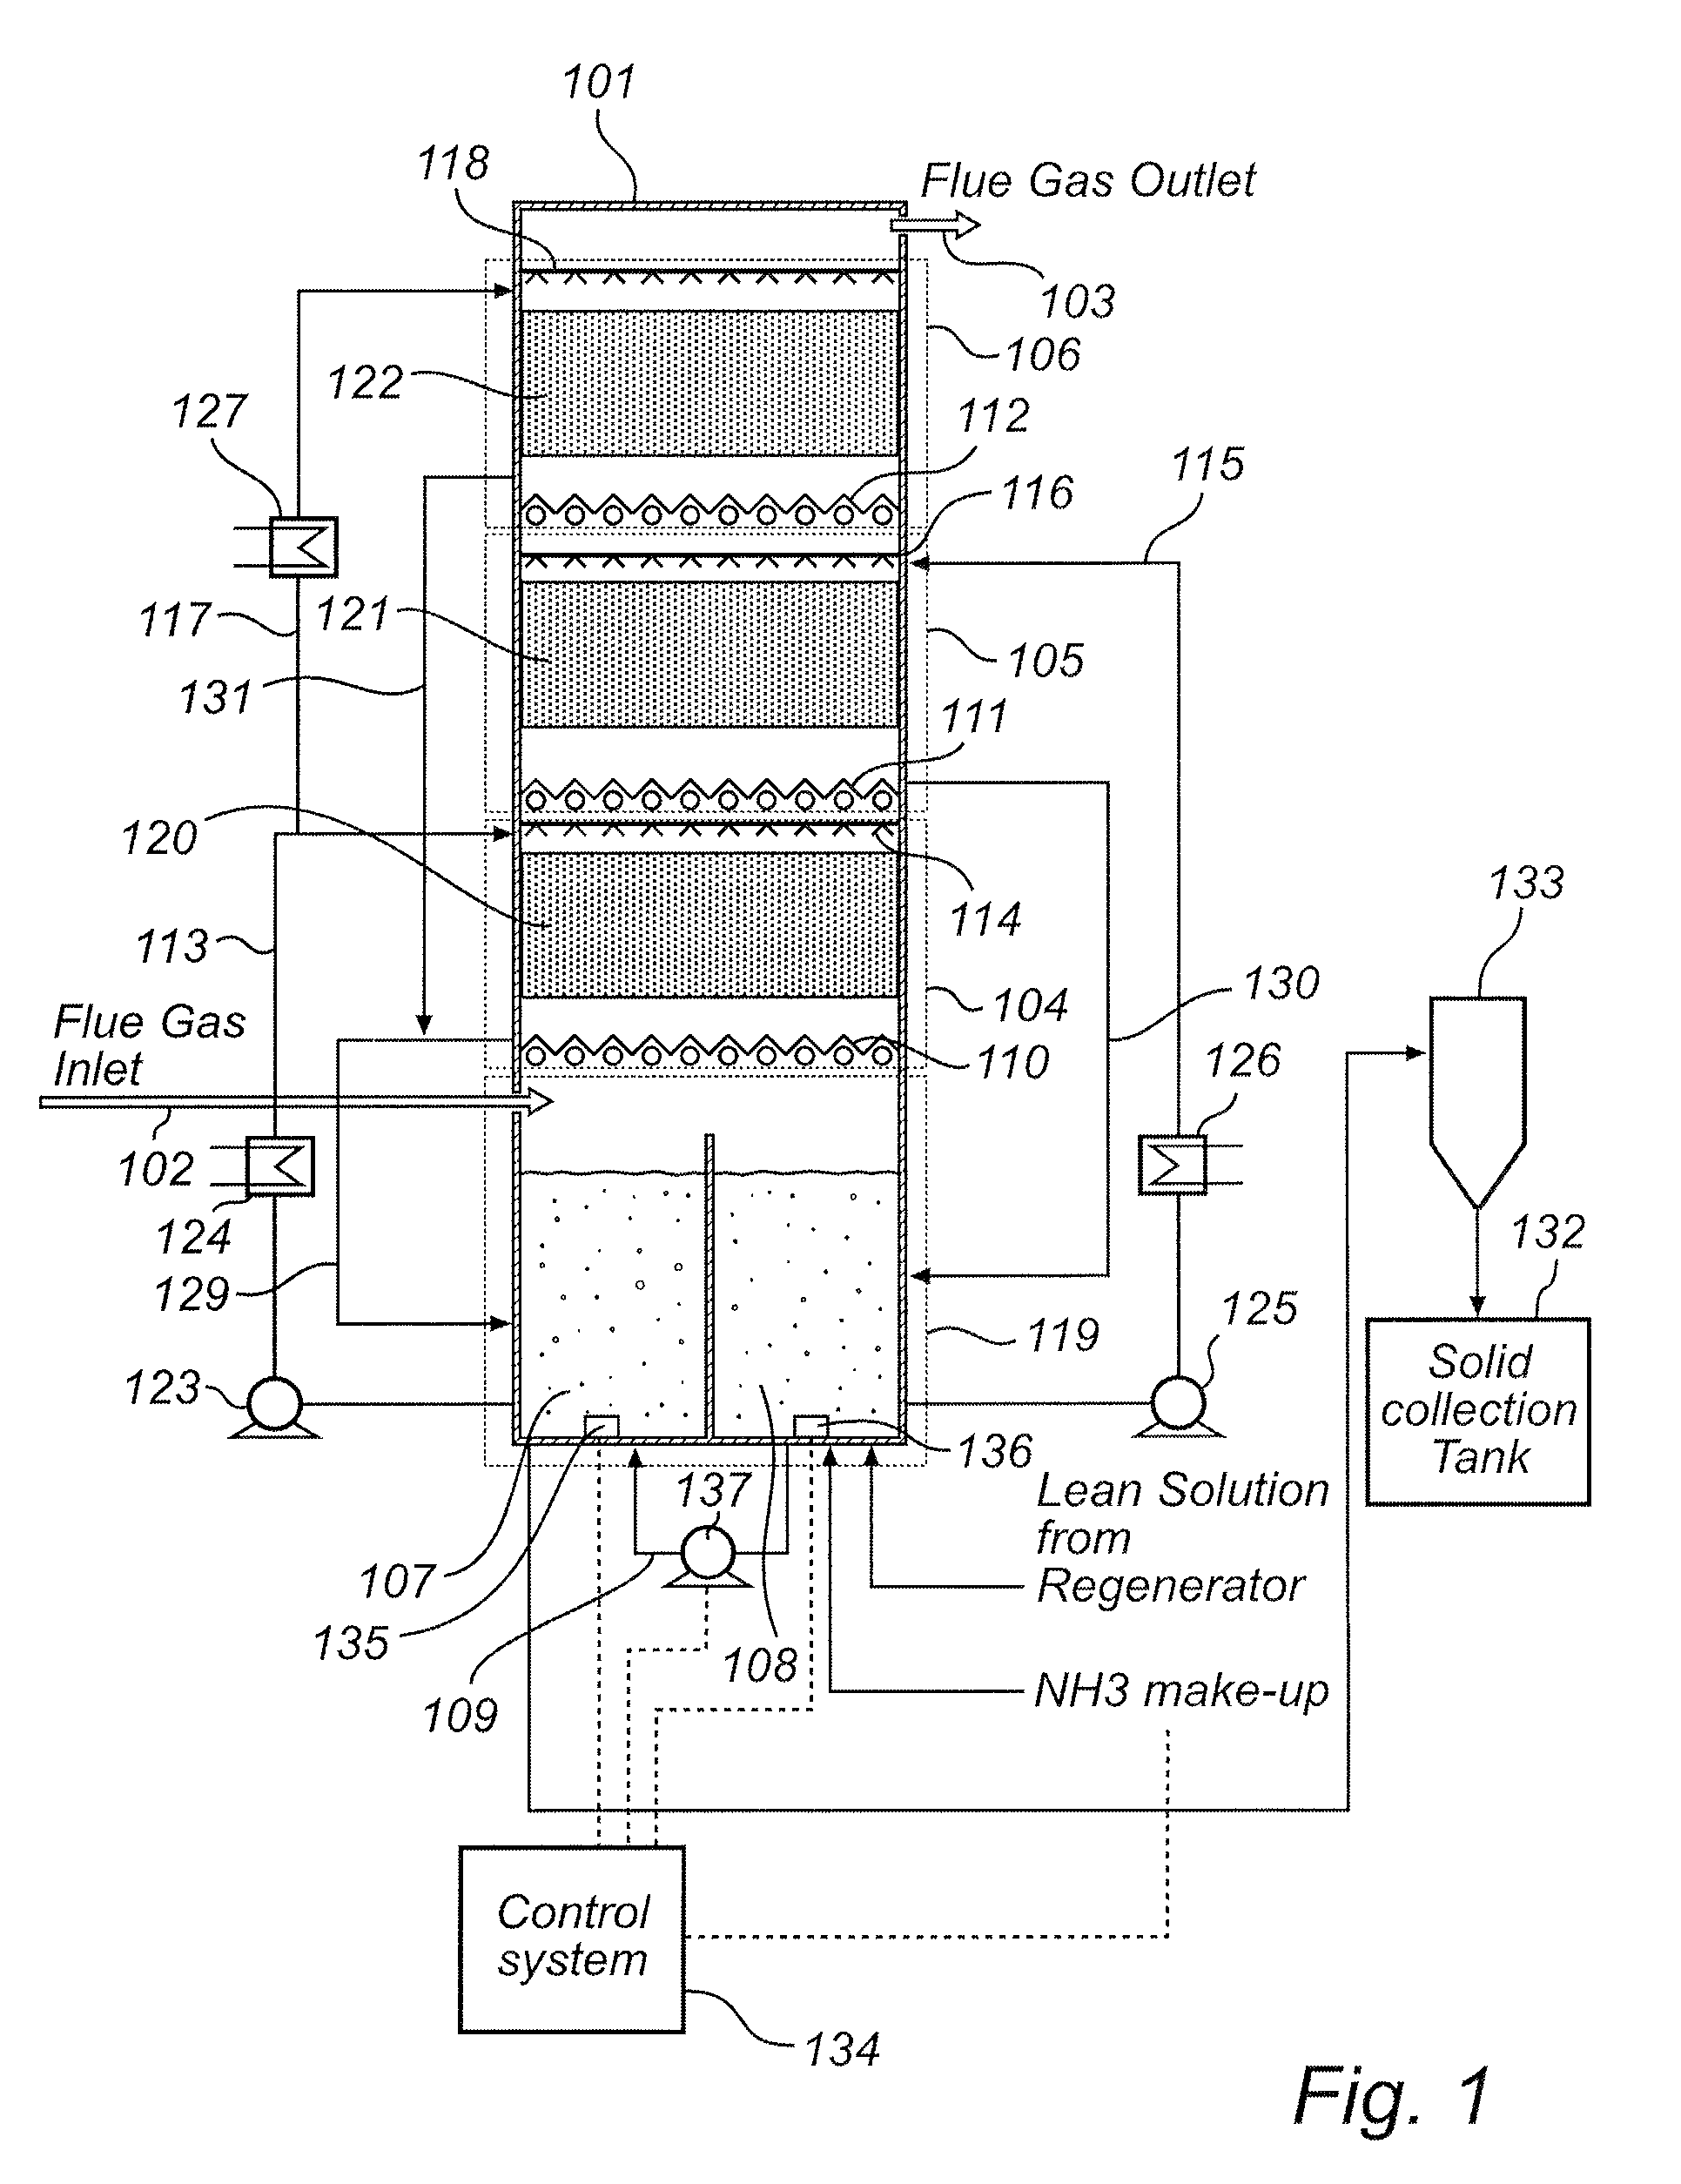 Single absorber vessel to capture co2